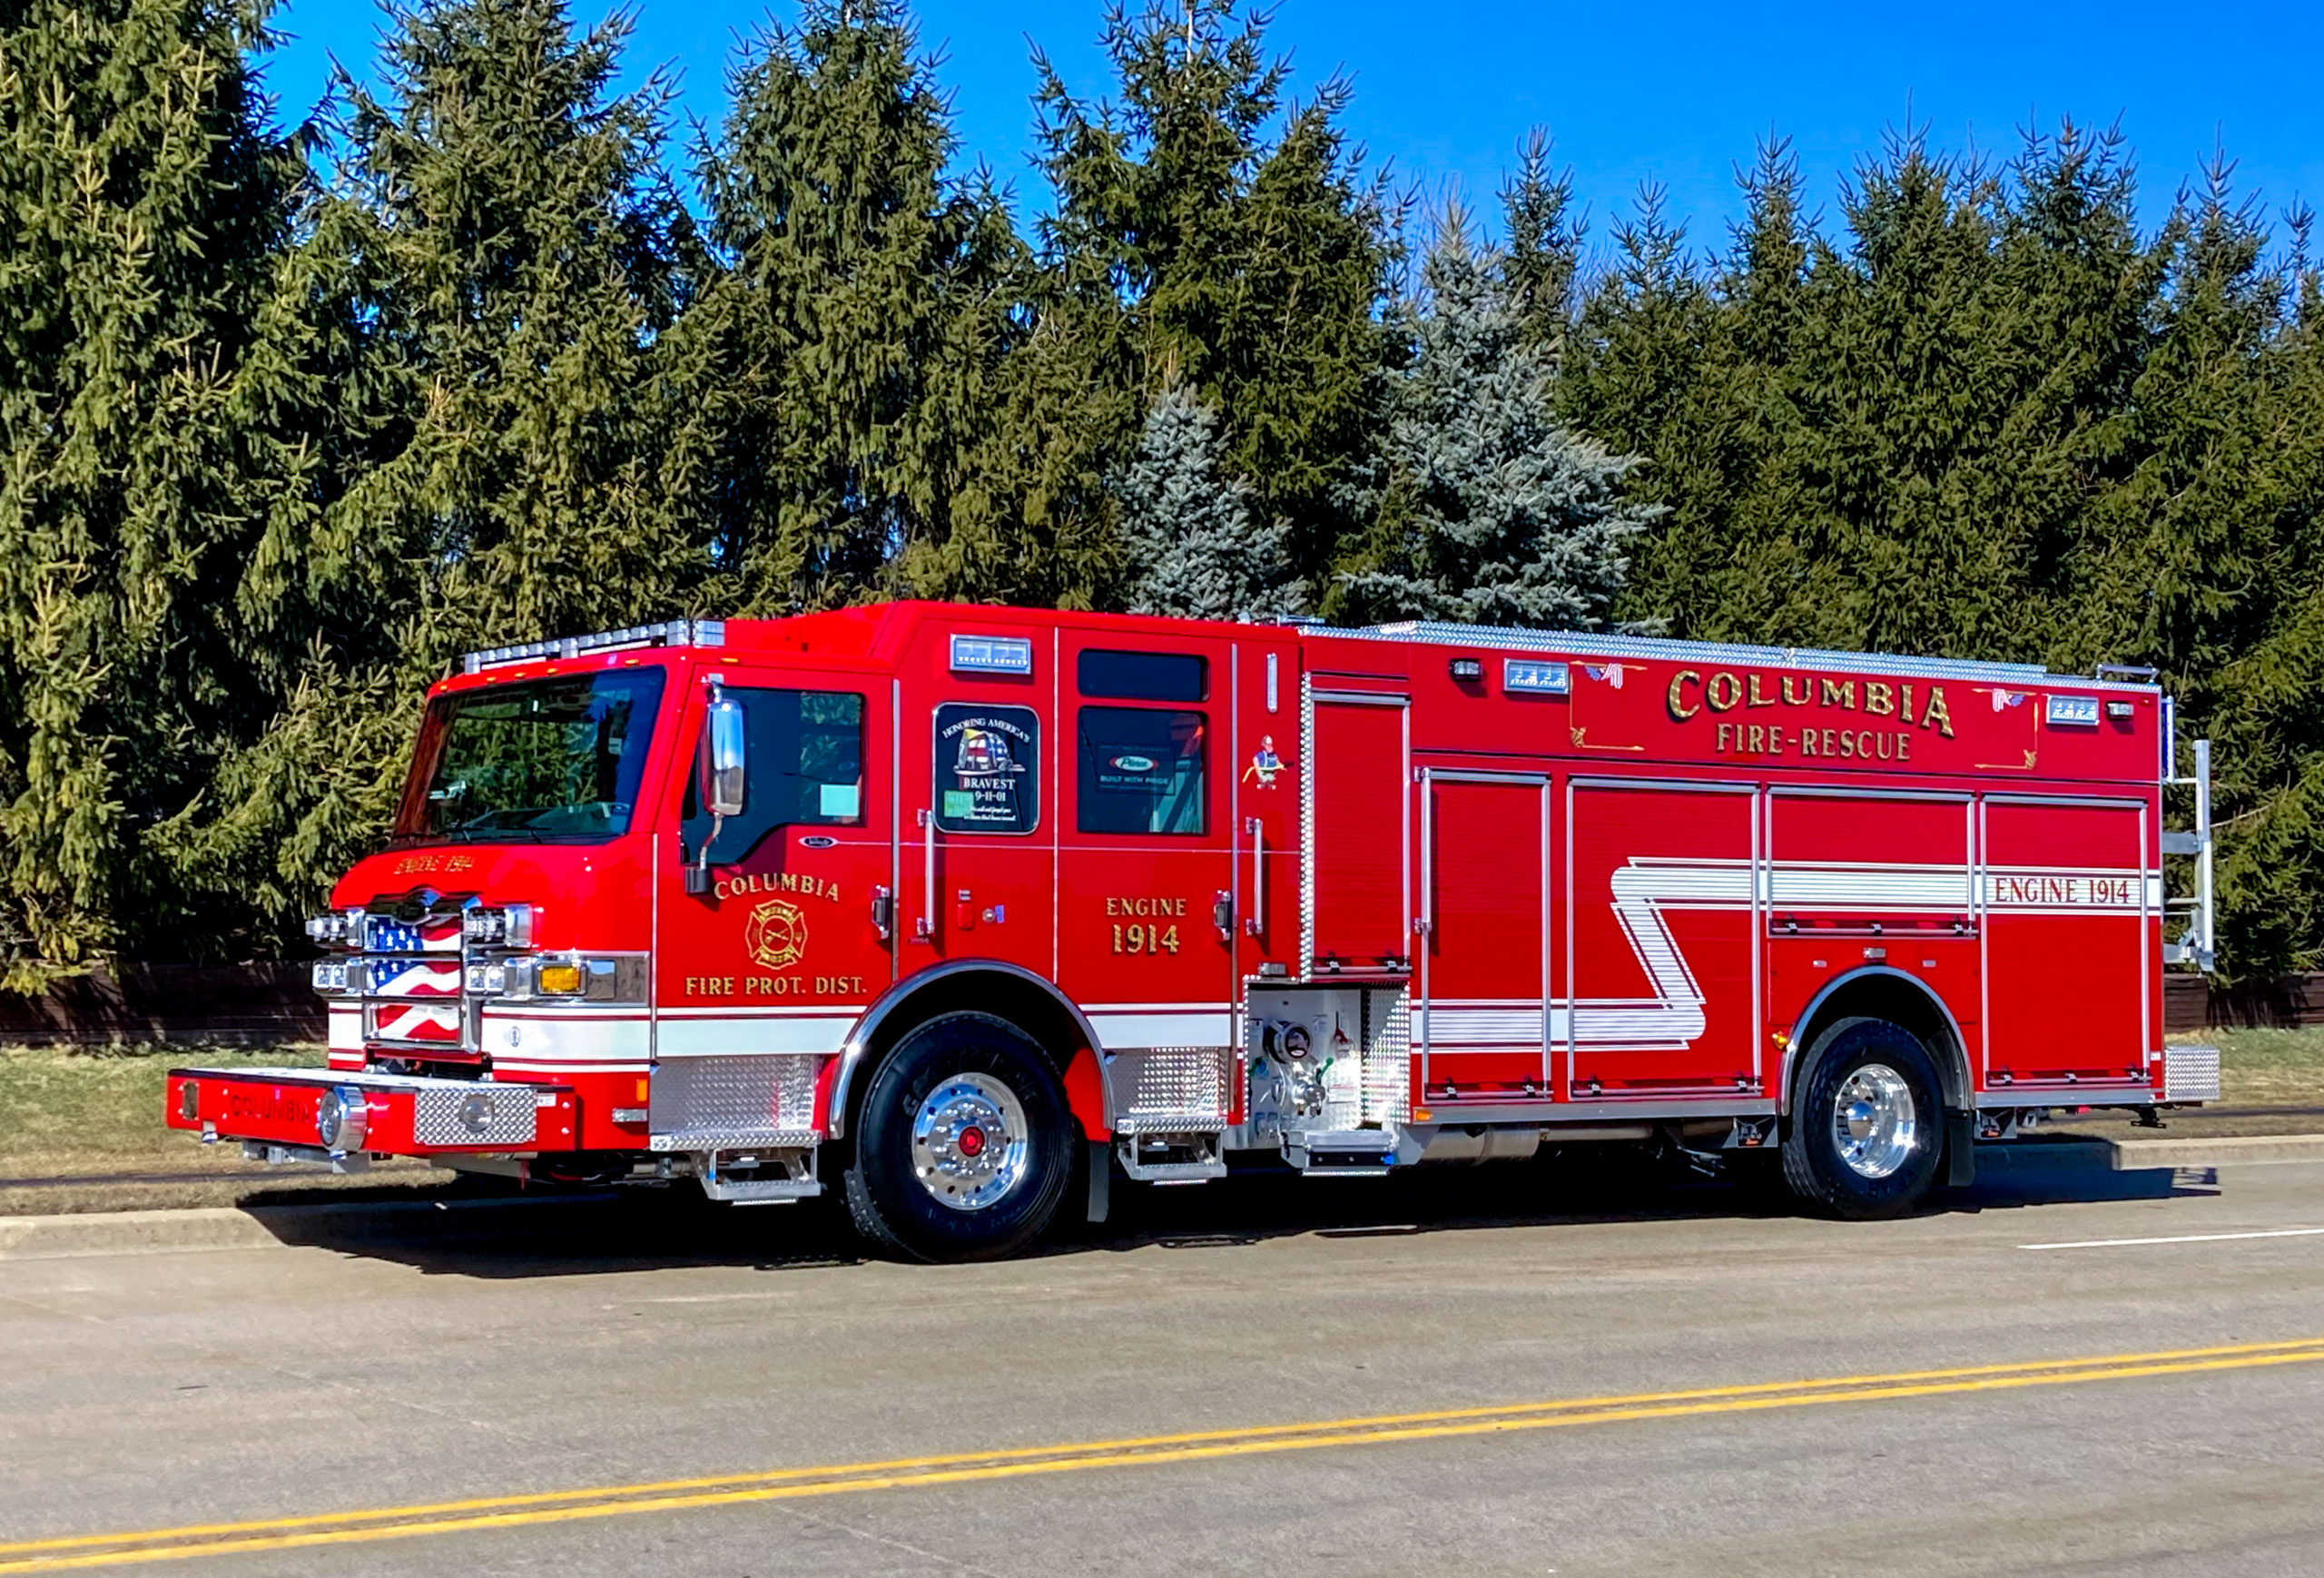 District Fire Pumper Columbia - Protection